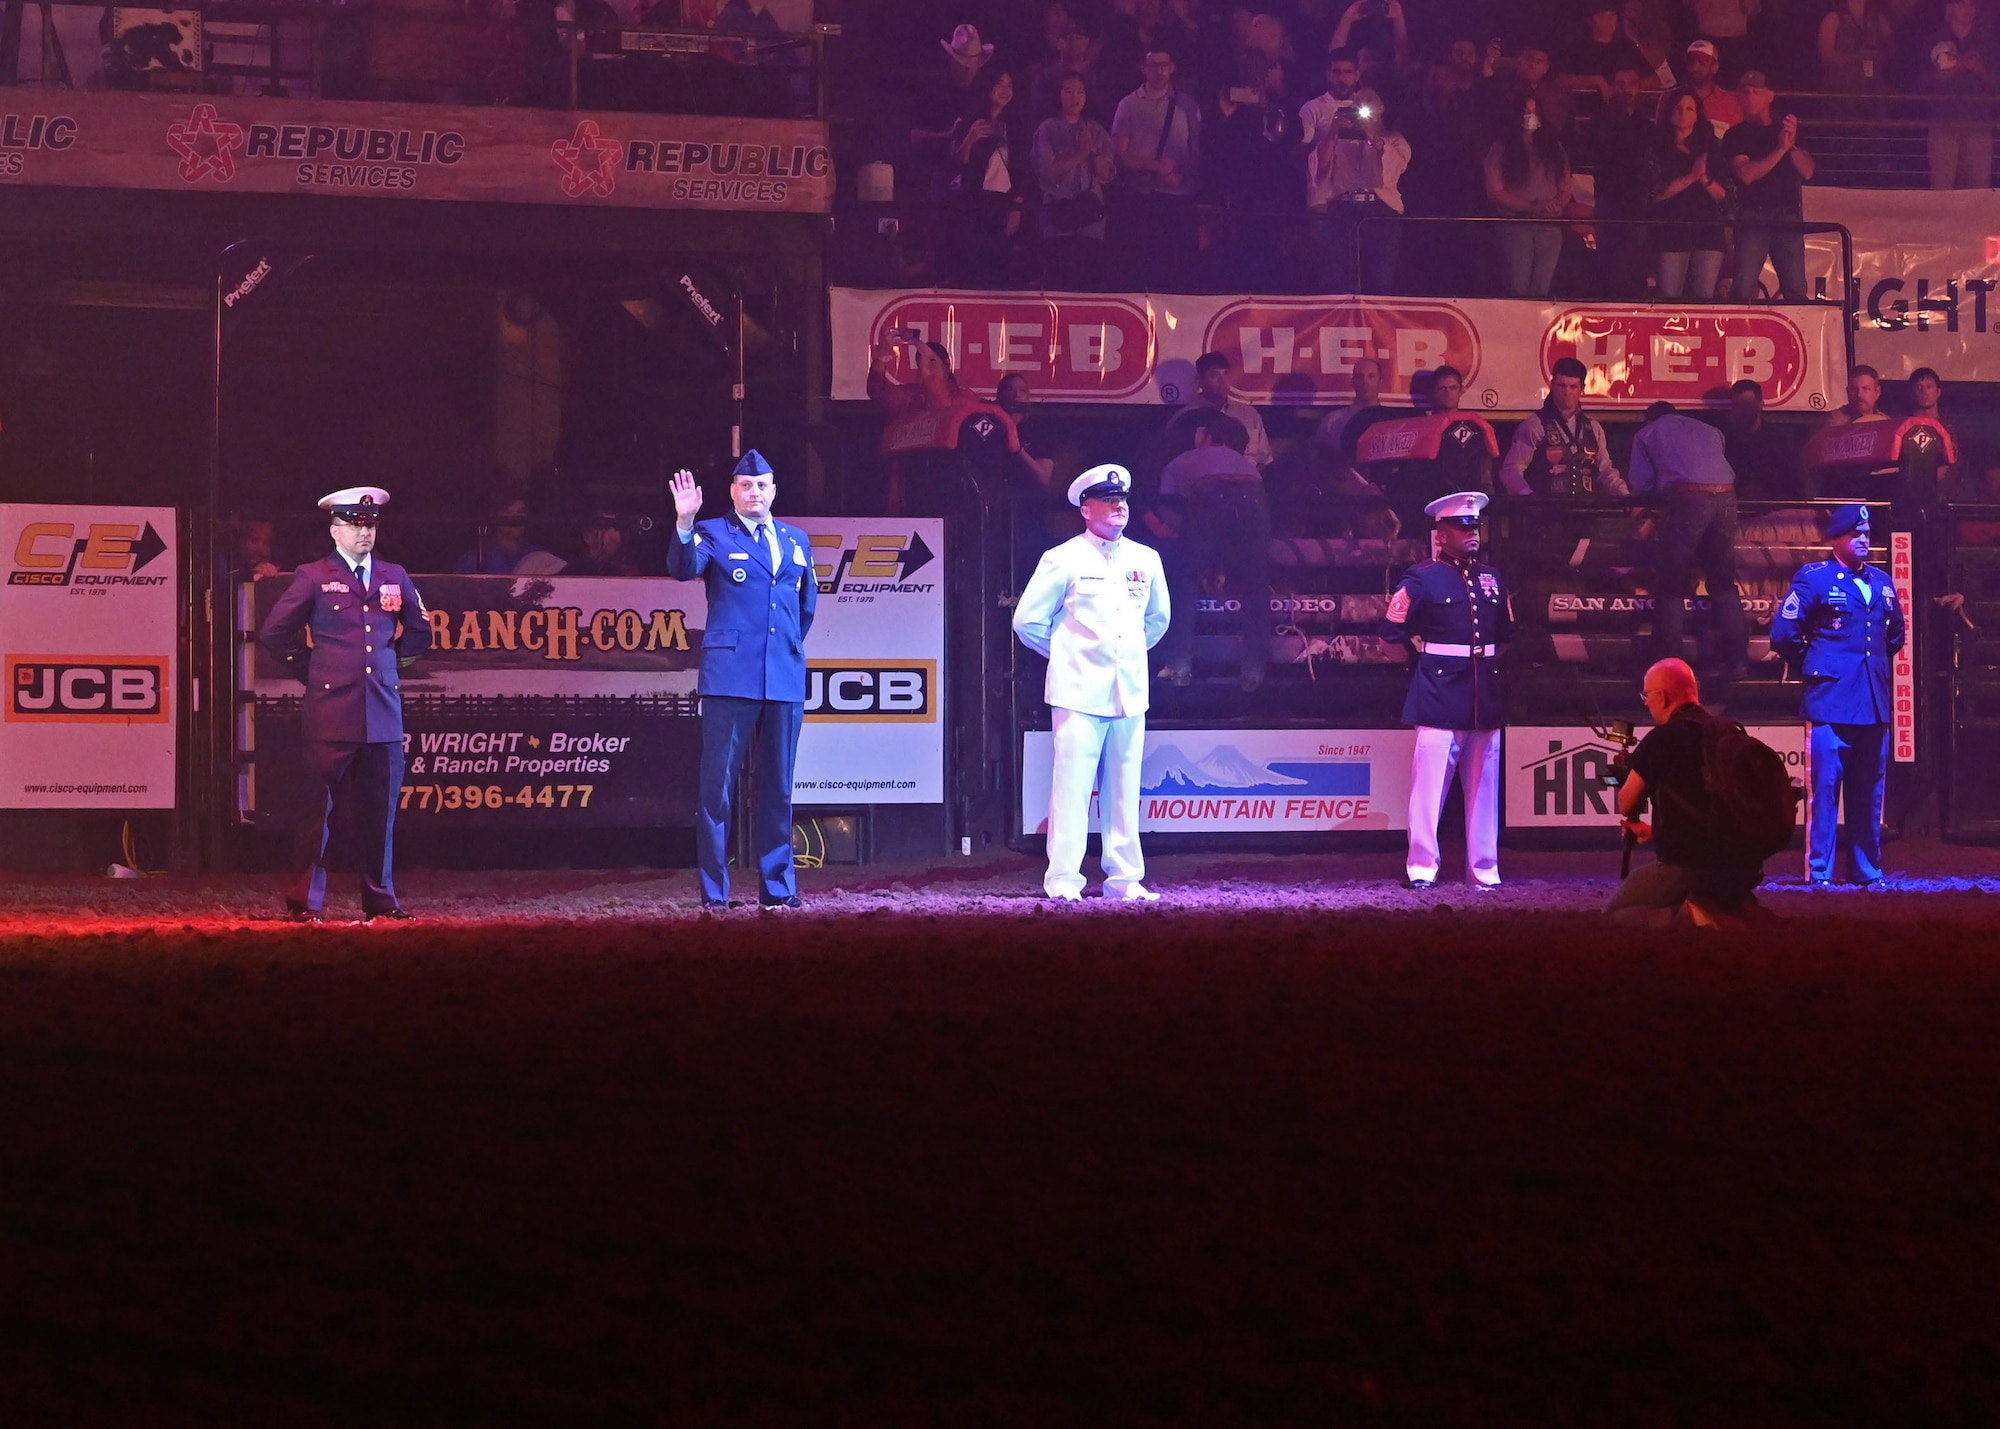 Event attendees recognize military members during the San Angelo Stock Show and Rodeo at the Foster Communications Coliseum, April 13, 2022. The San Angelo Stock Show and Rodeo Association hosted Military Appreciation Night to thank service members for the country's defense. (U.S. Air Force photo by Airman 1st Class Sarah Williams)